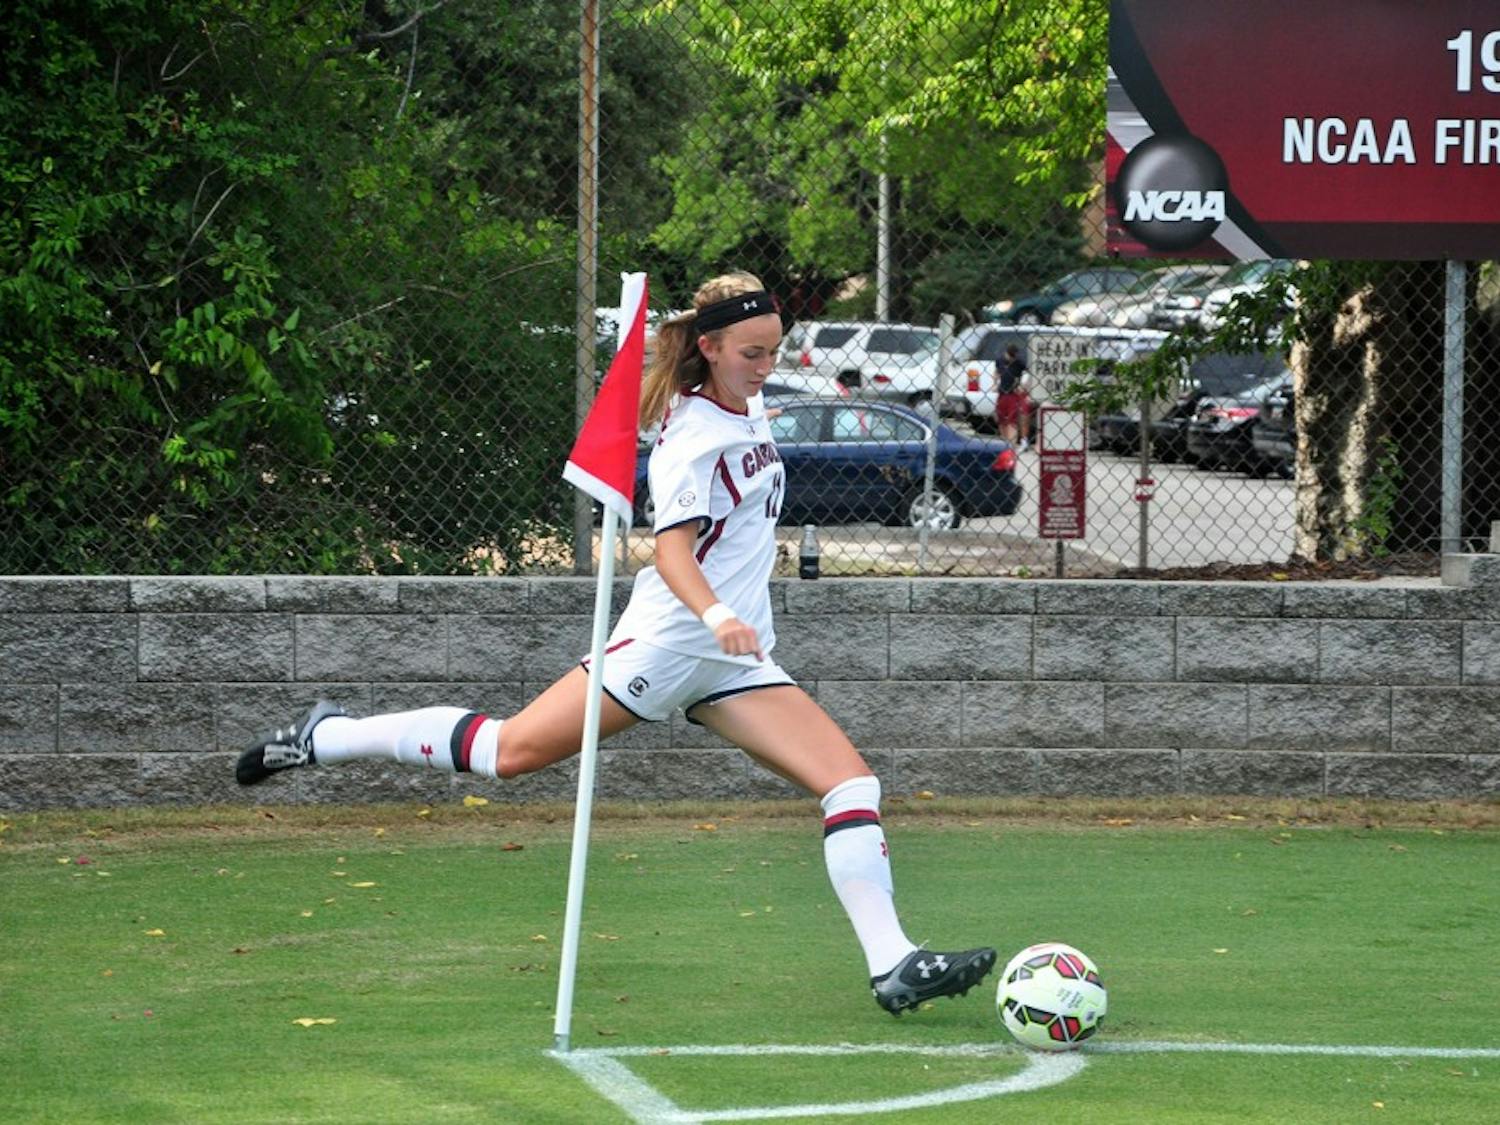 	Sophomore Chelsea Drennan sealed the deal for the Gamecocks Sunday, scoring her first goal of the season in a win over High Point.